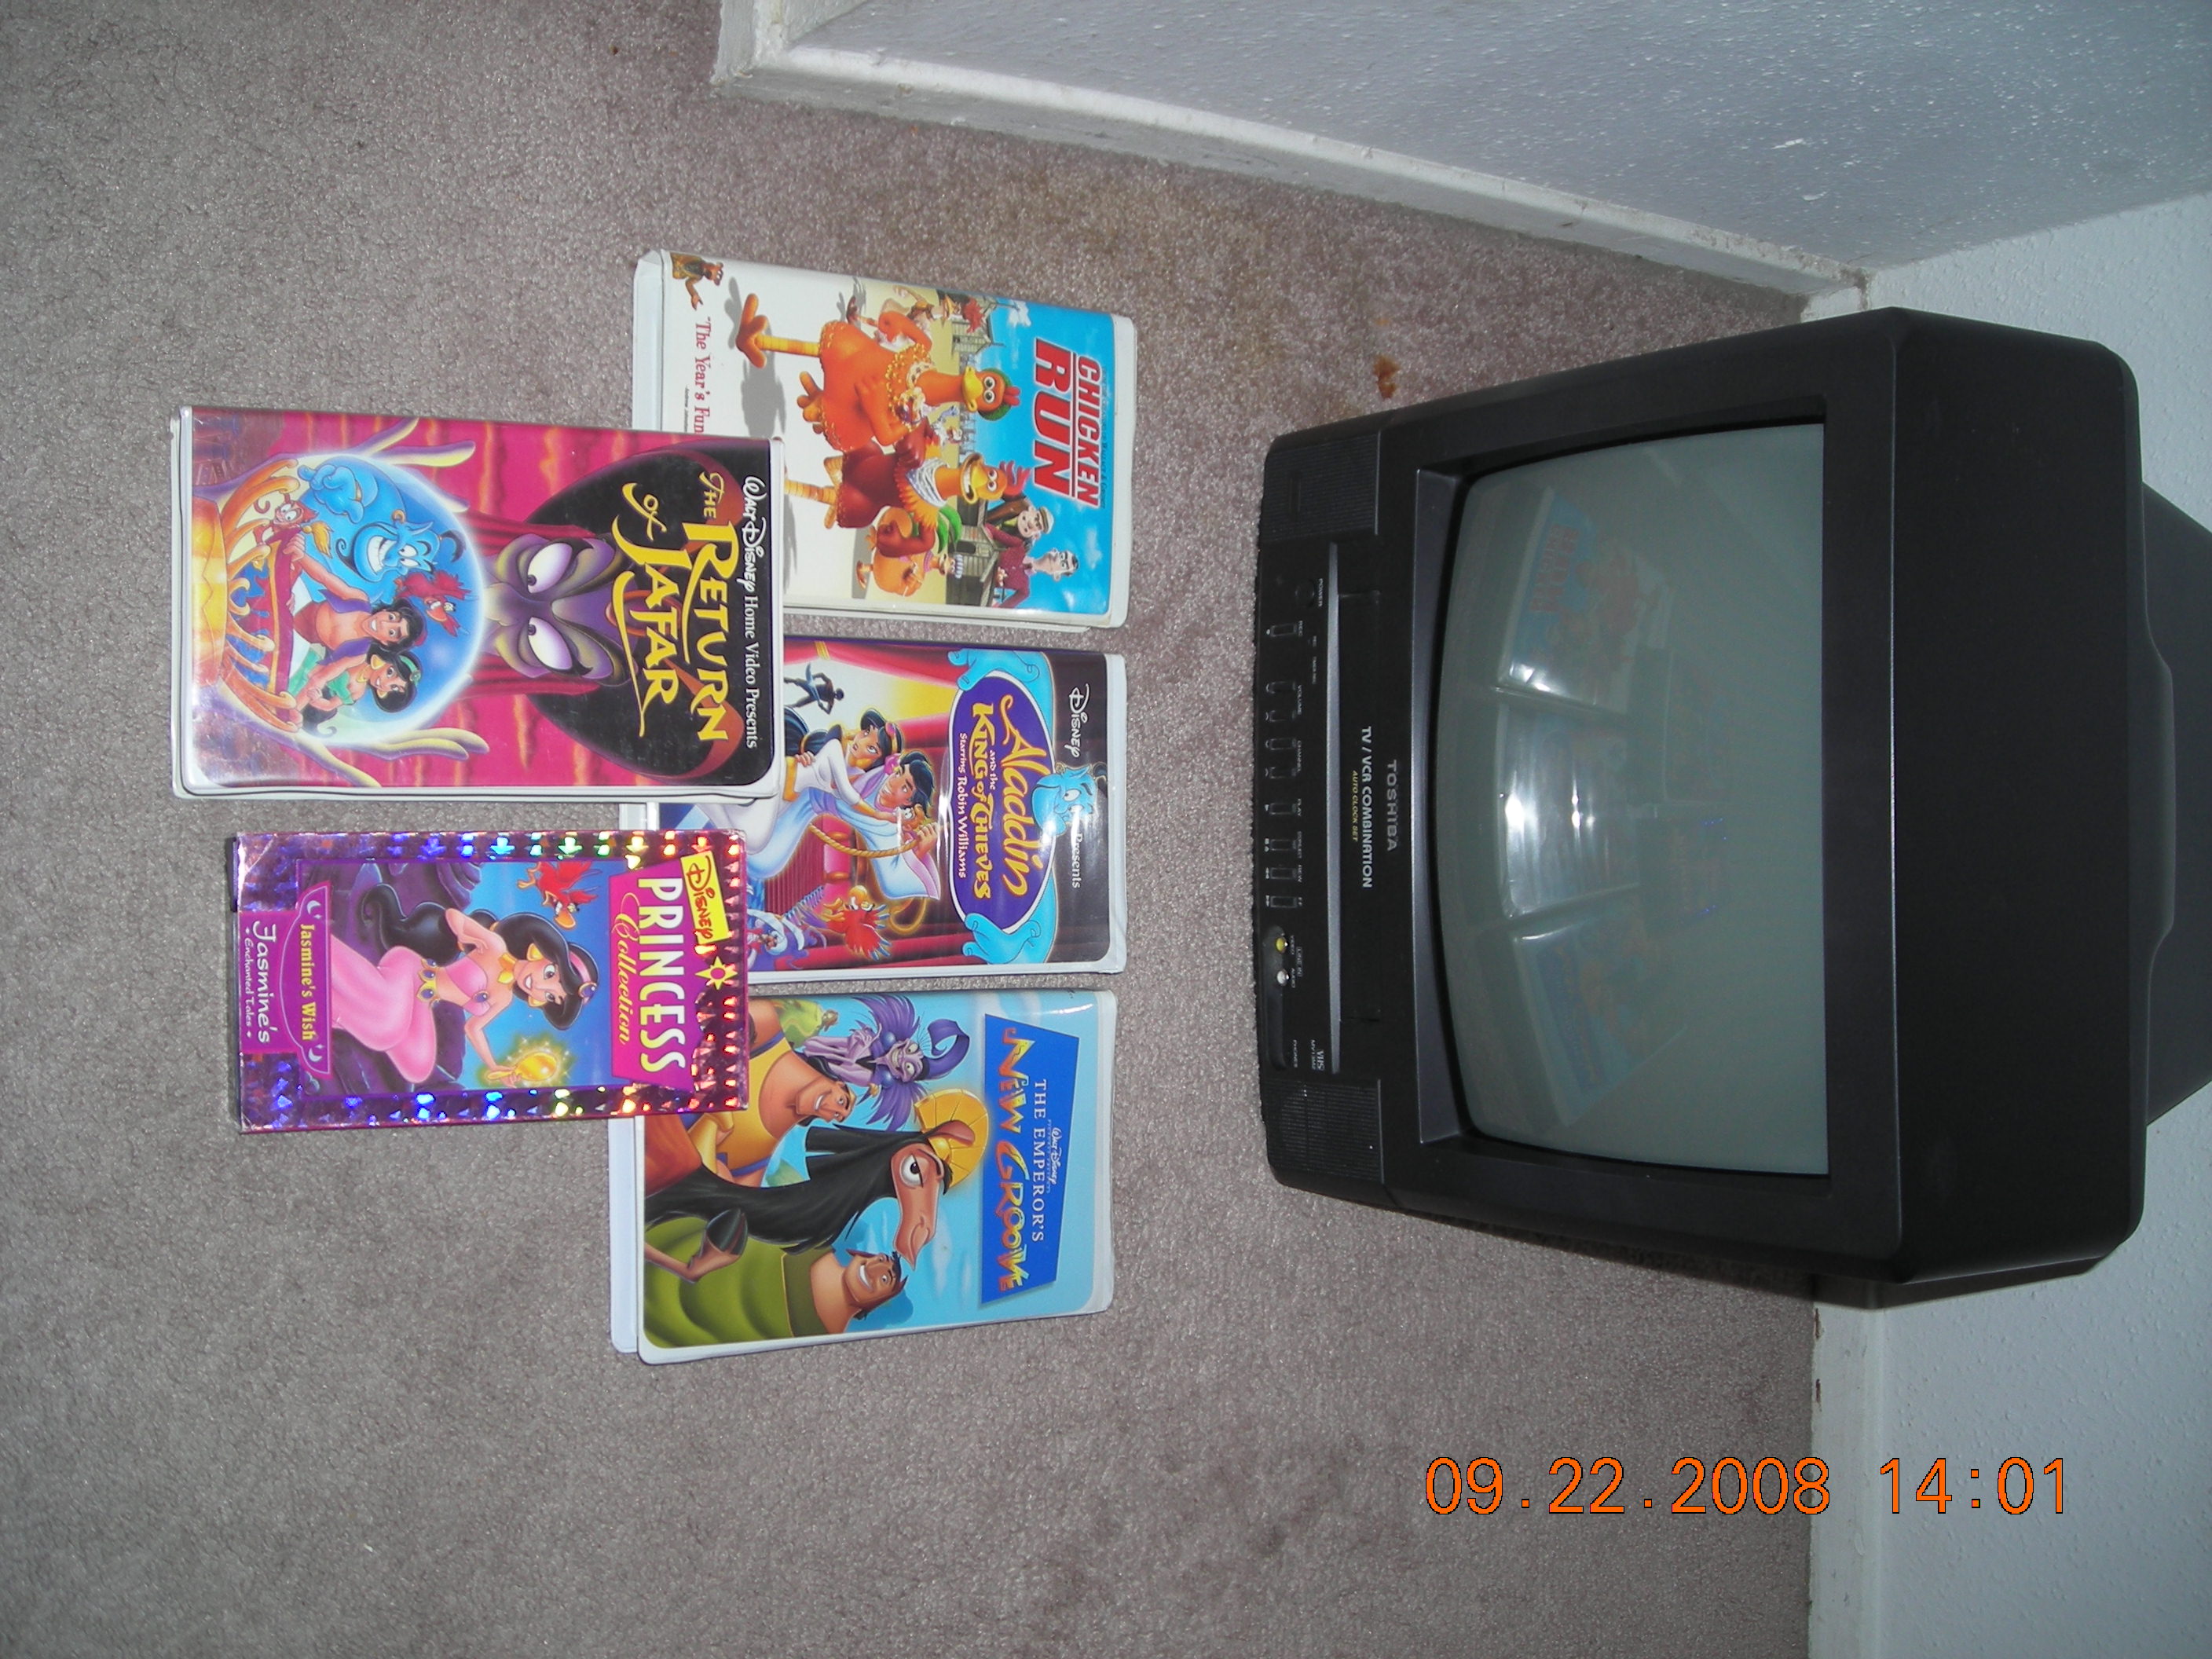 13 INCH TOSHIBA TV/VCR COMBO WITH CHOICE OF 5 MOVIES!!!